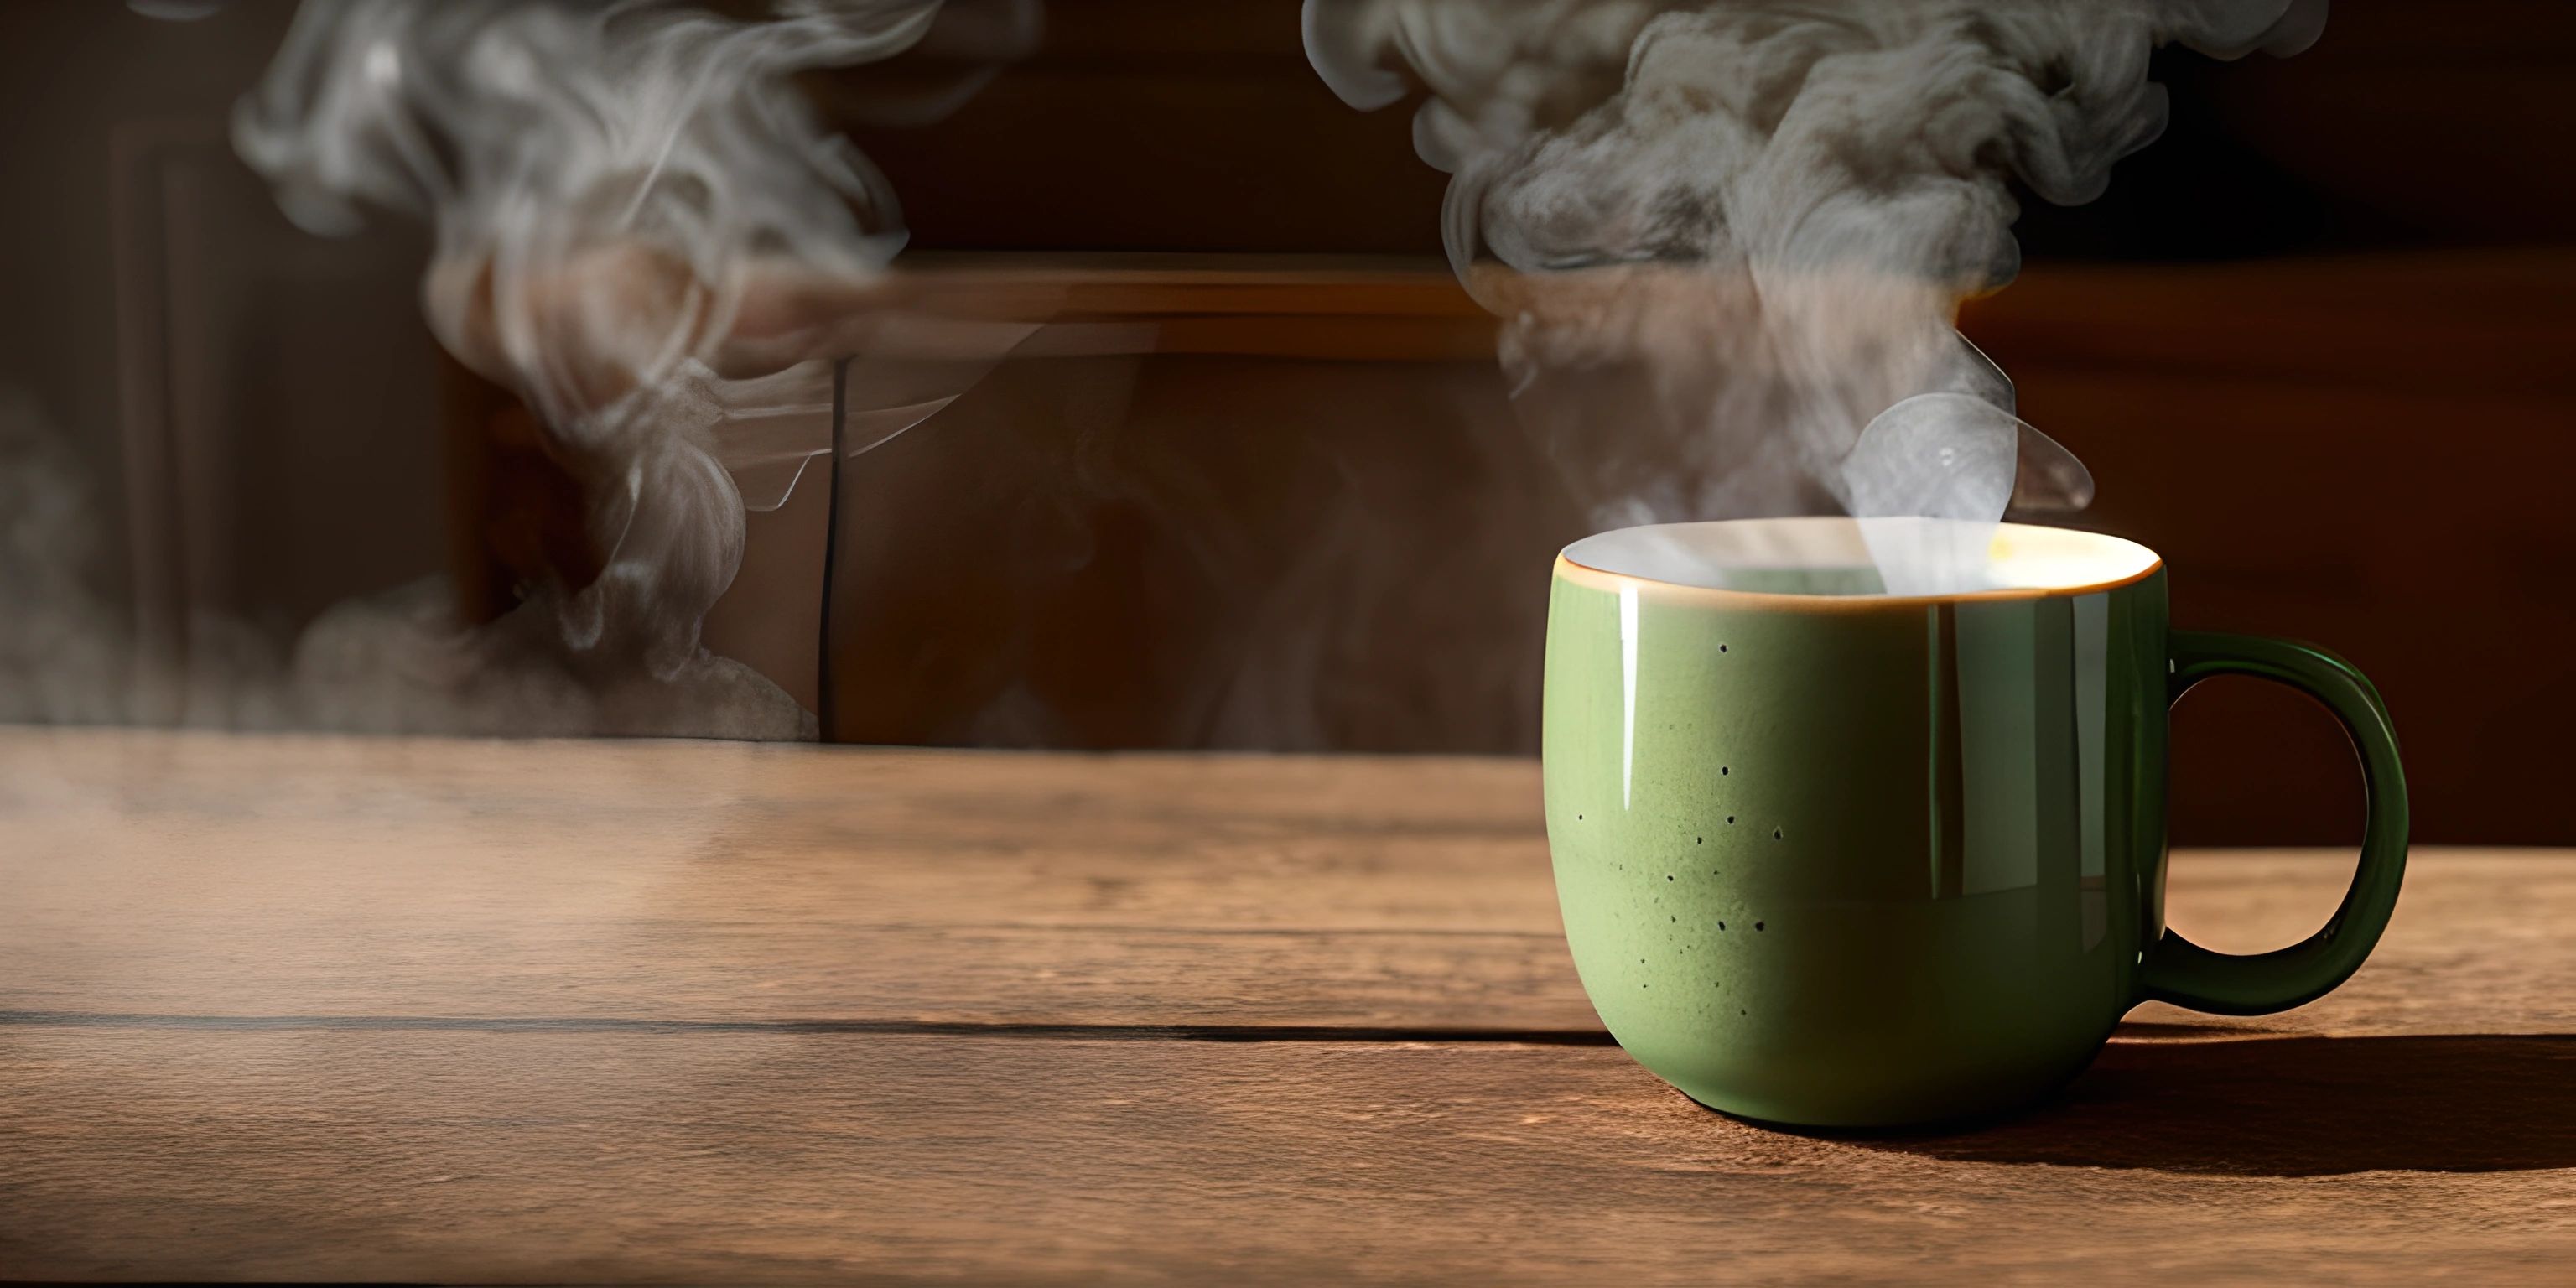 a steaming green cup sits on a table in front of a camera lens and frame